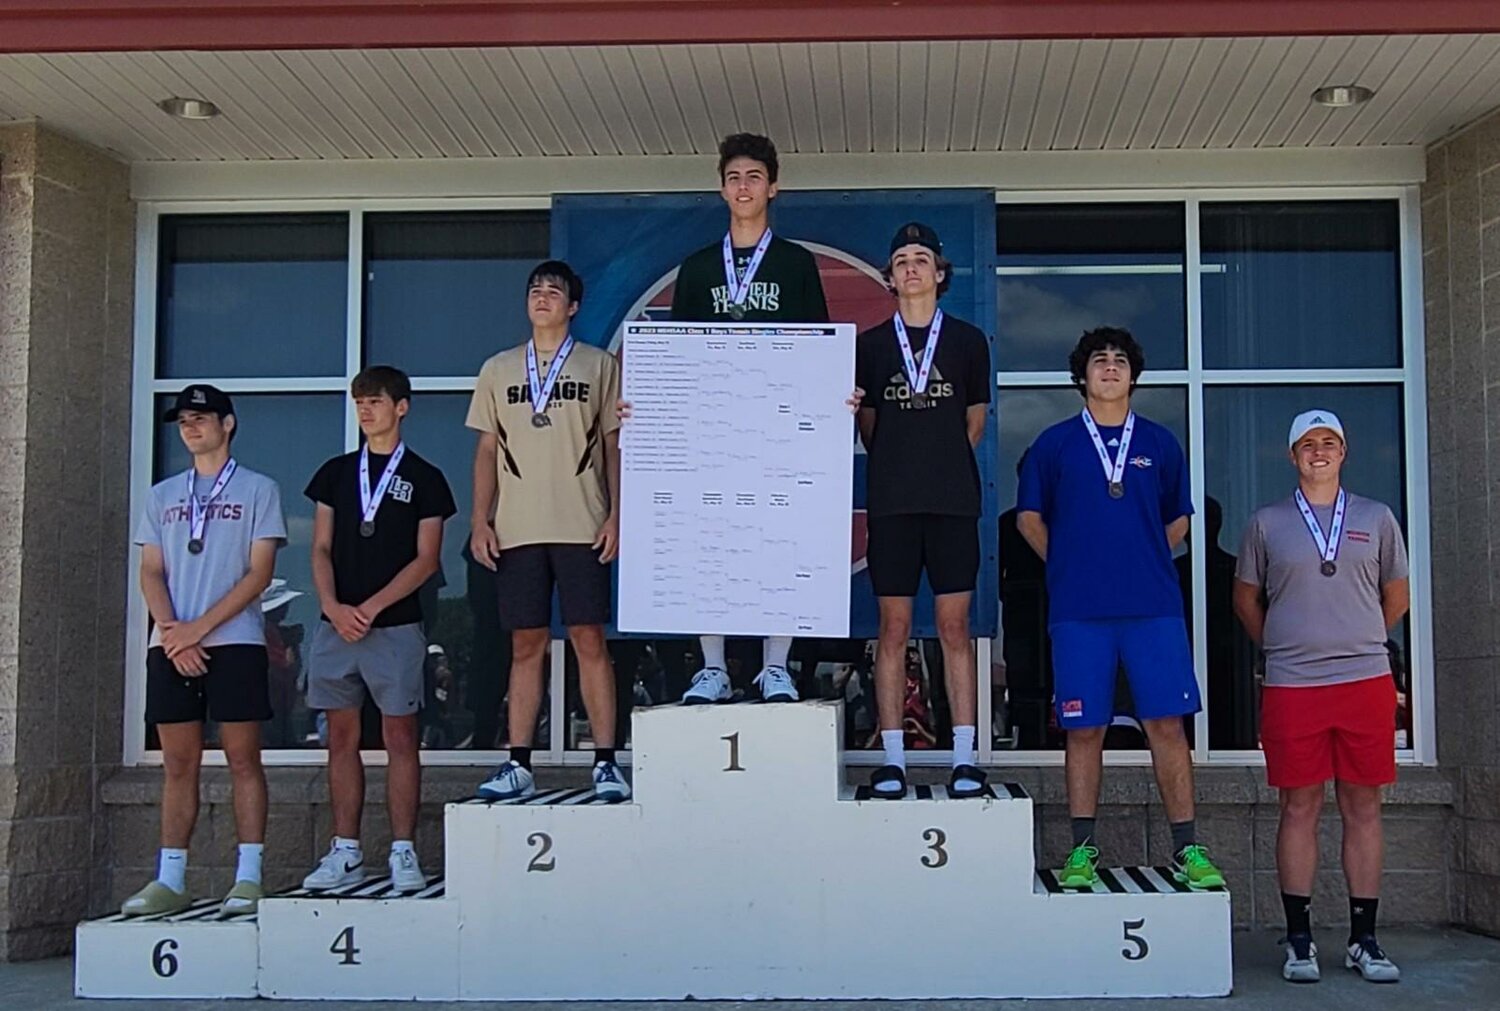 Mexico junior Brendan McKeown stands on the podium at the Class 1 singles boys tennis tournament at Cooper Tennis Complex in Springfield on Saturday with the other state medalists. McKeown earned seventh place.